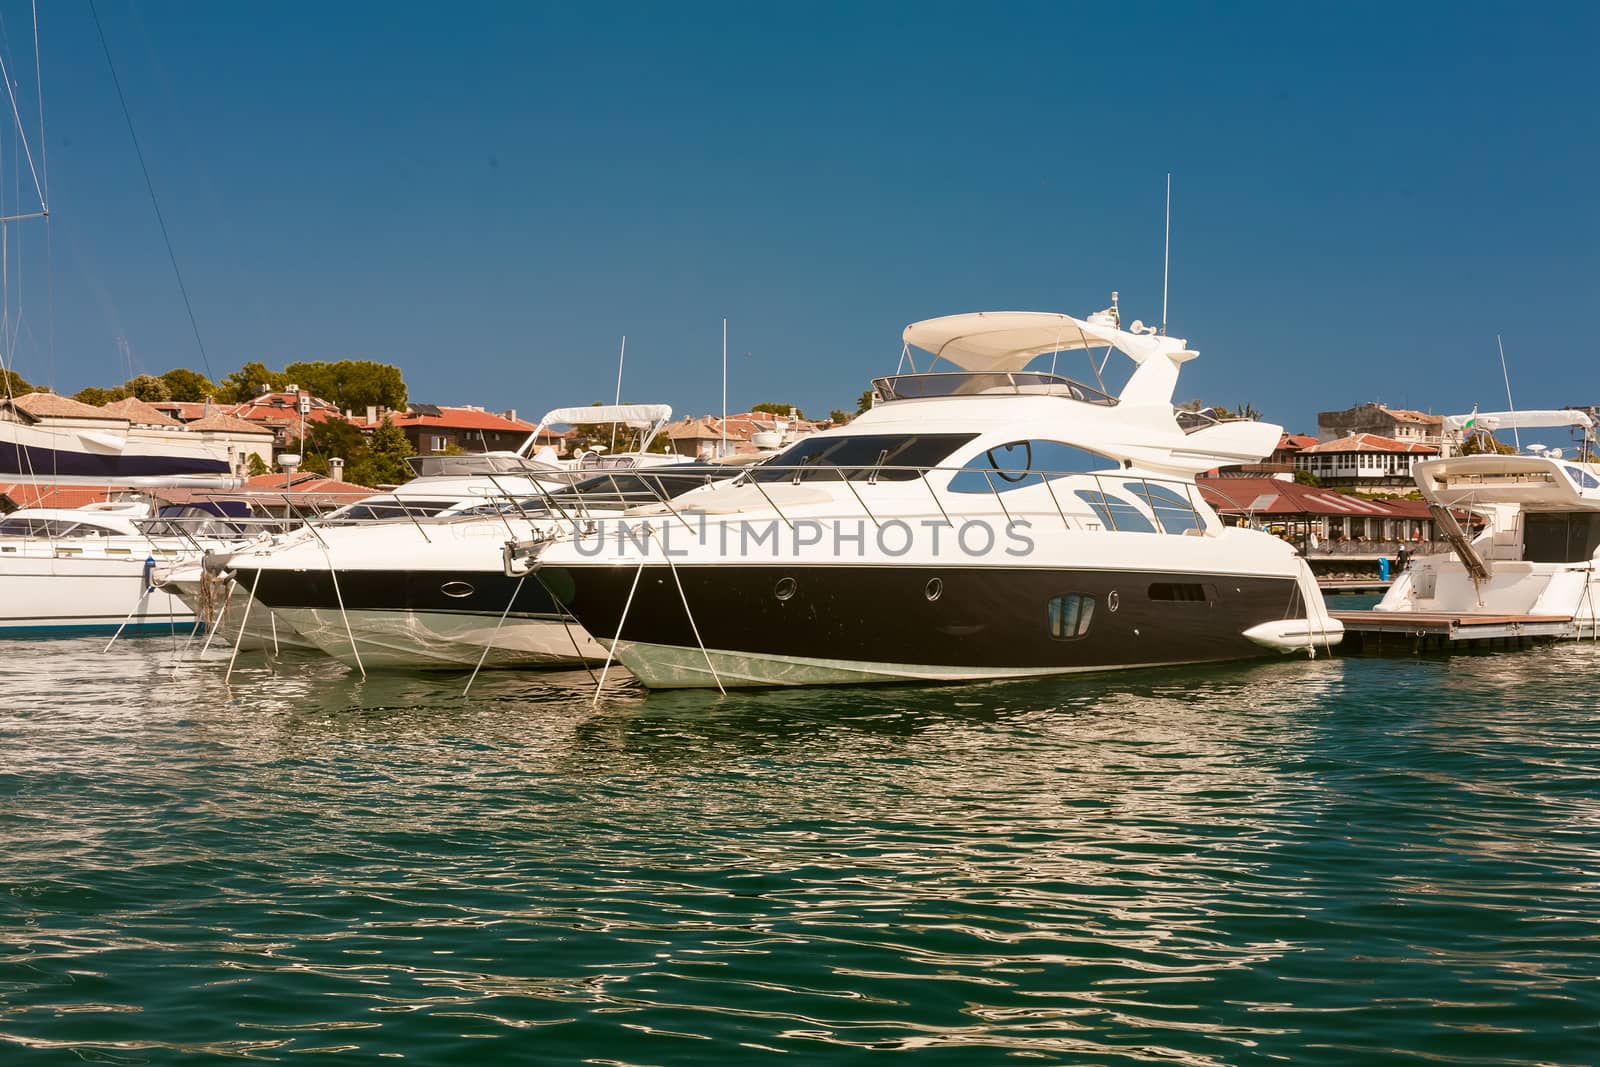 Row of luxury motorised yachts moored in a sheltered harbour, close up view of the bows